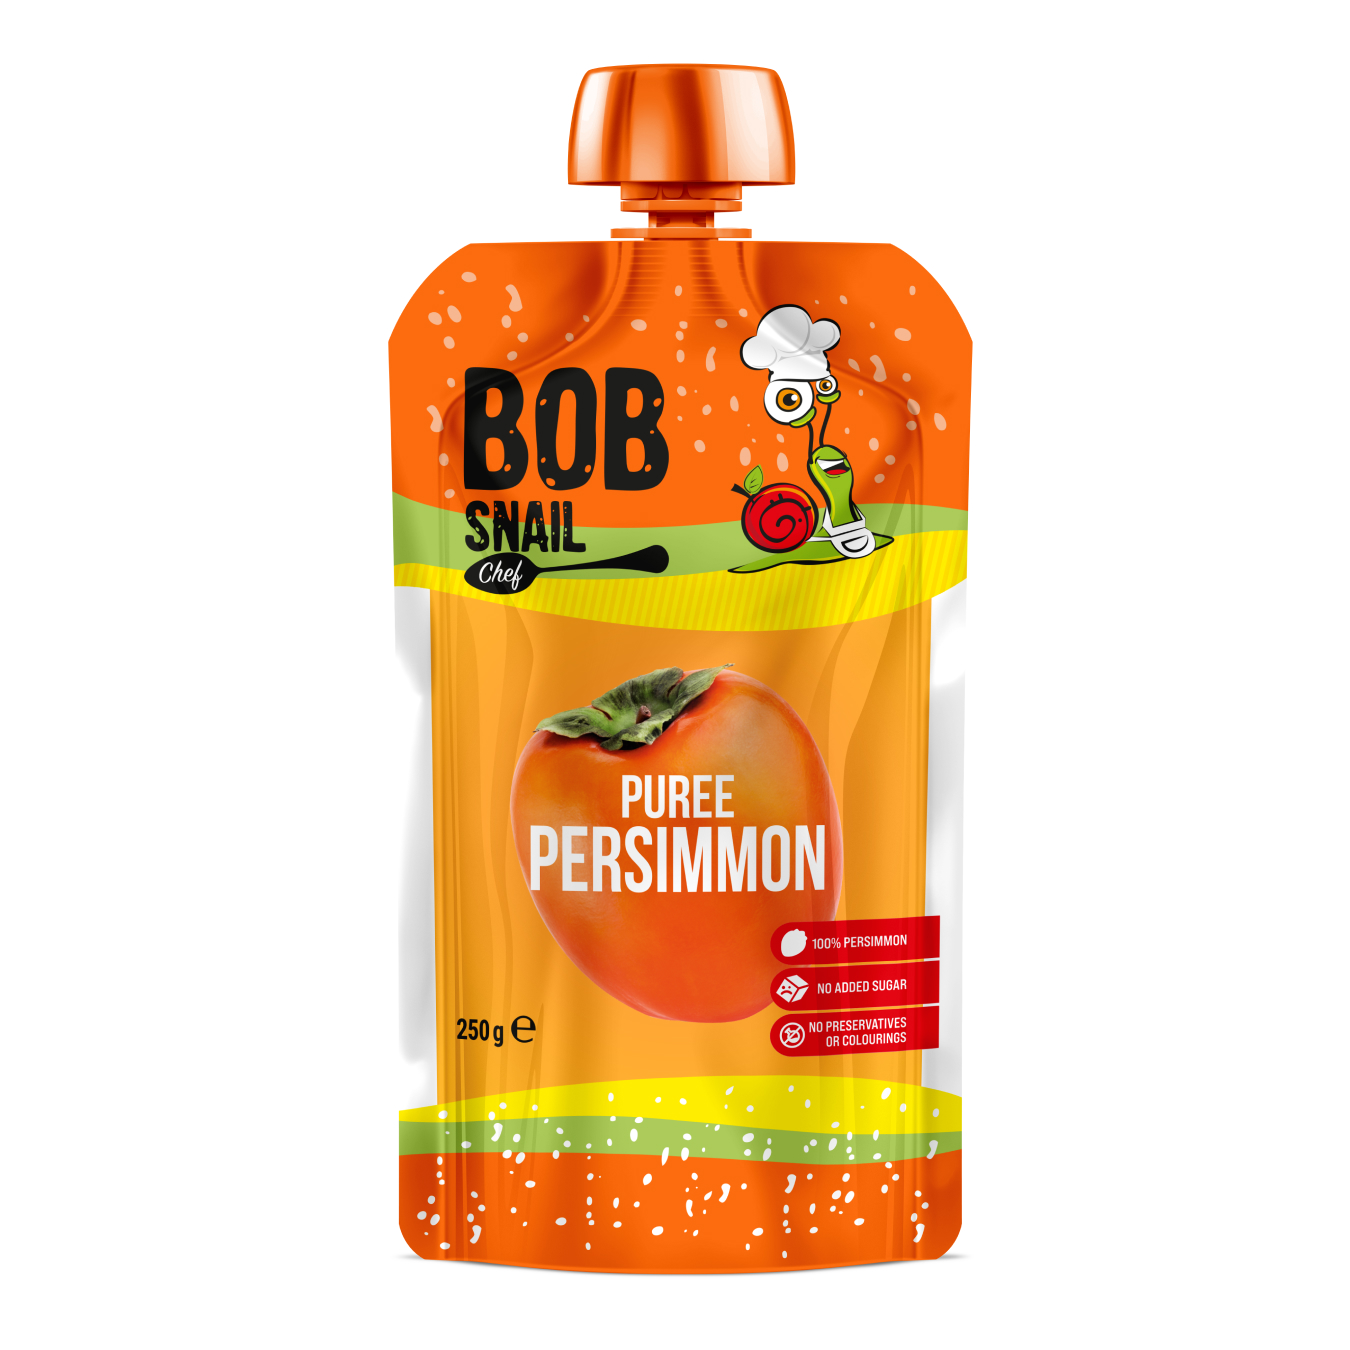 Bob Snail fruit puree from Persimmon pasteurized 250g